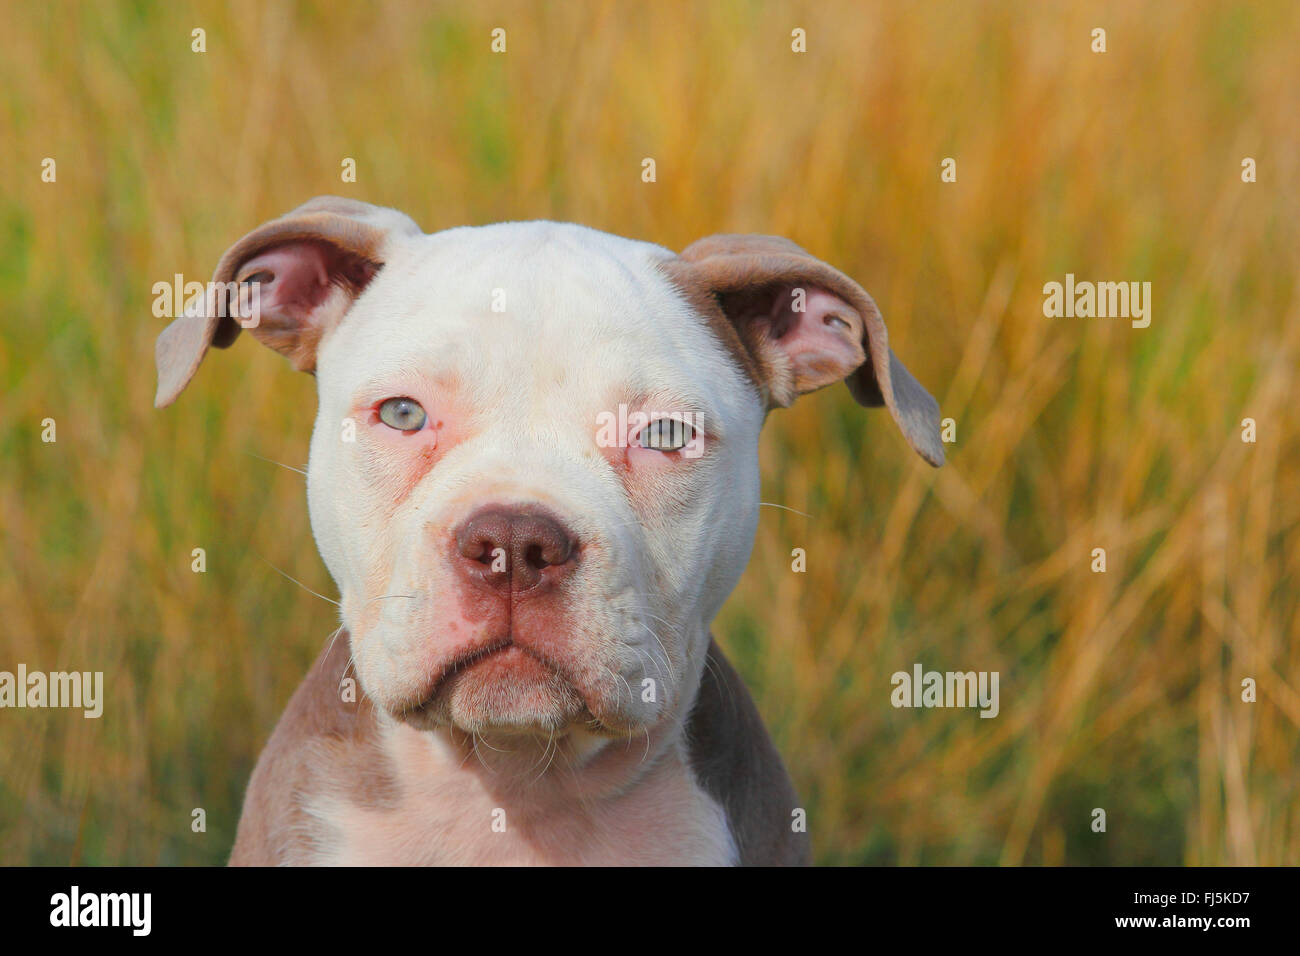 Olde English Bulldog (Canis lupus f. familiaris), twelve weaks old puppy sitting in a meadow, portrait, Germany Stock Photo